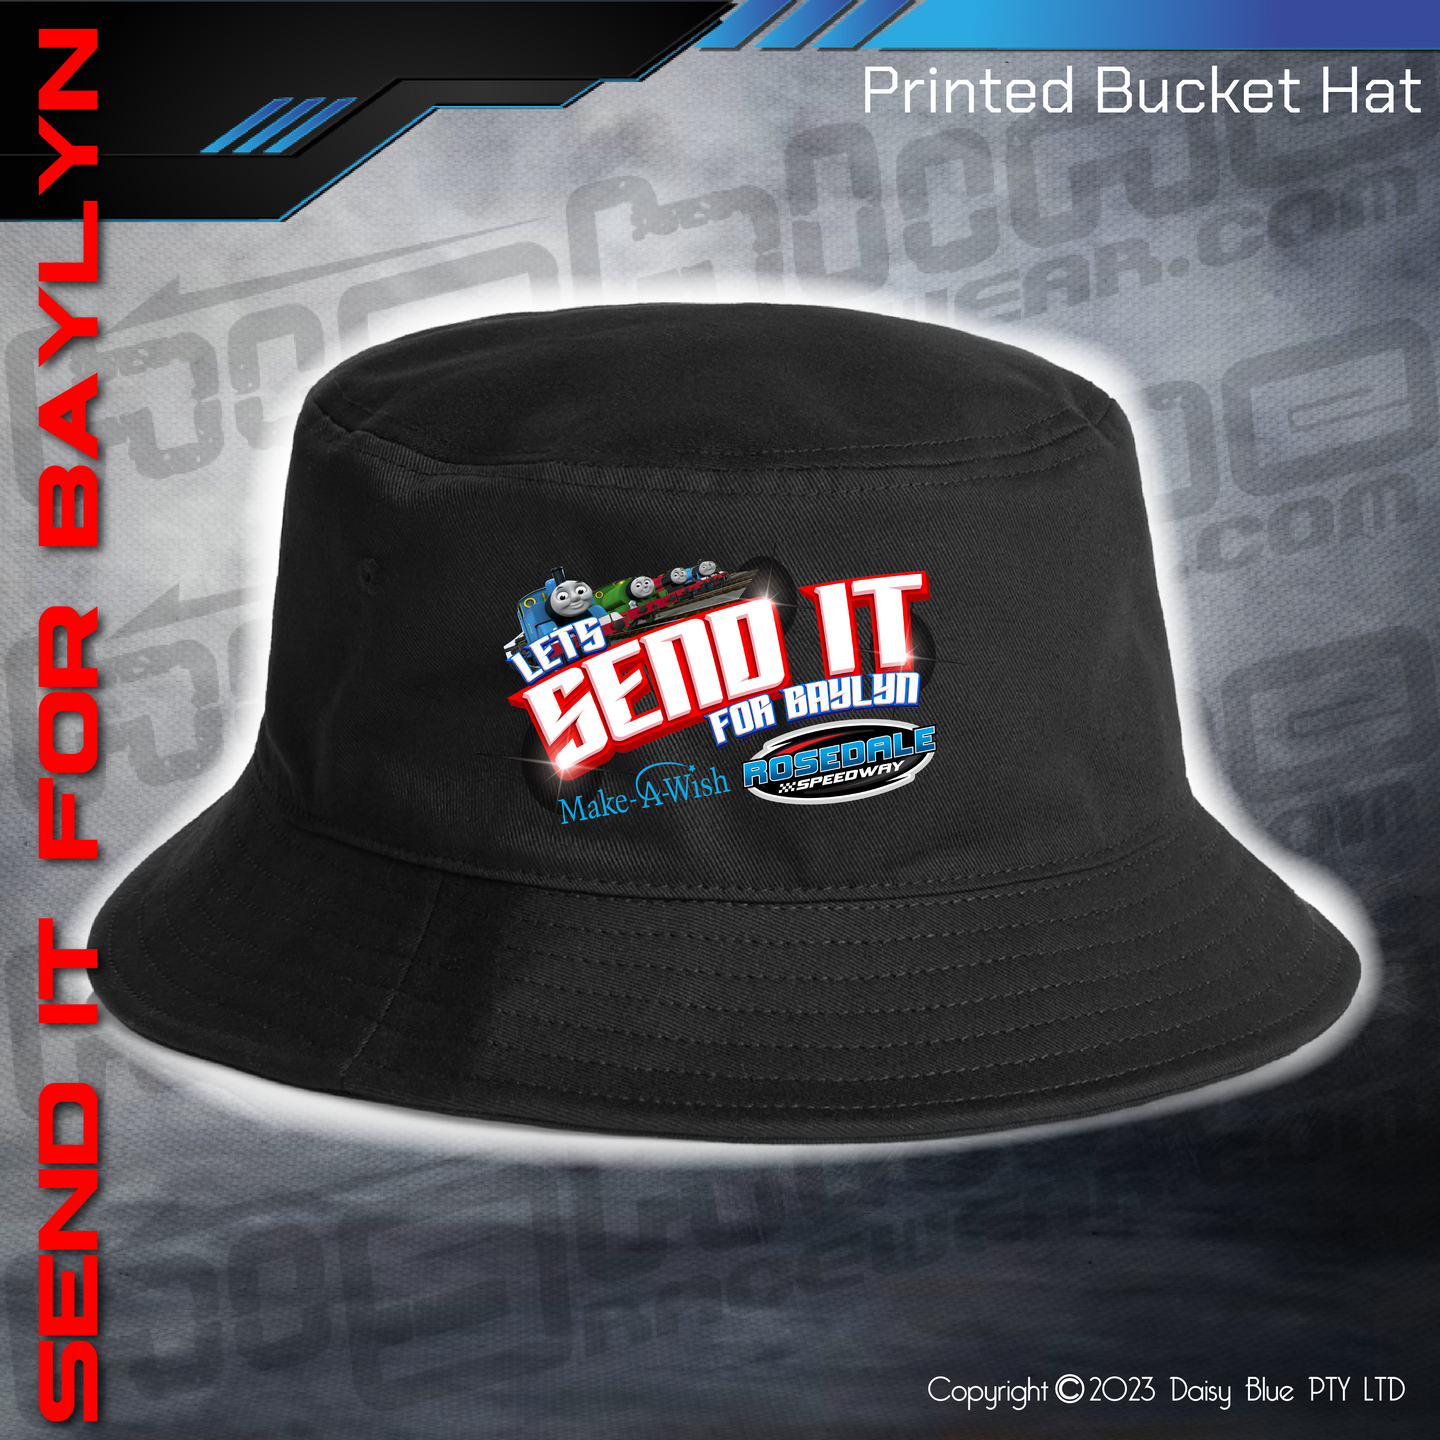 Printed Bucket Hat - LET'S SEND IT FOR BAYLYN